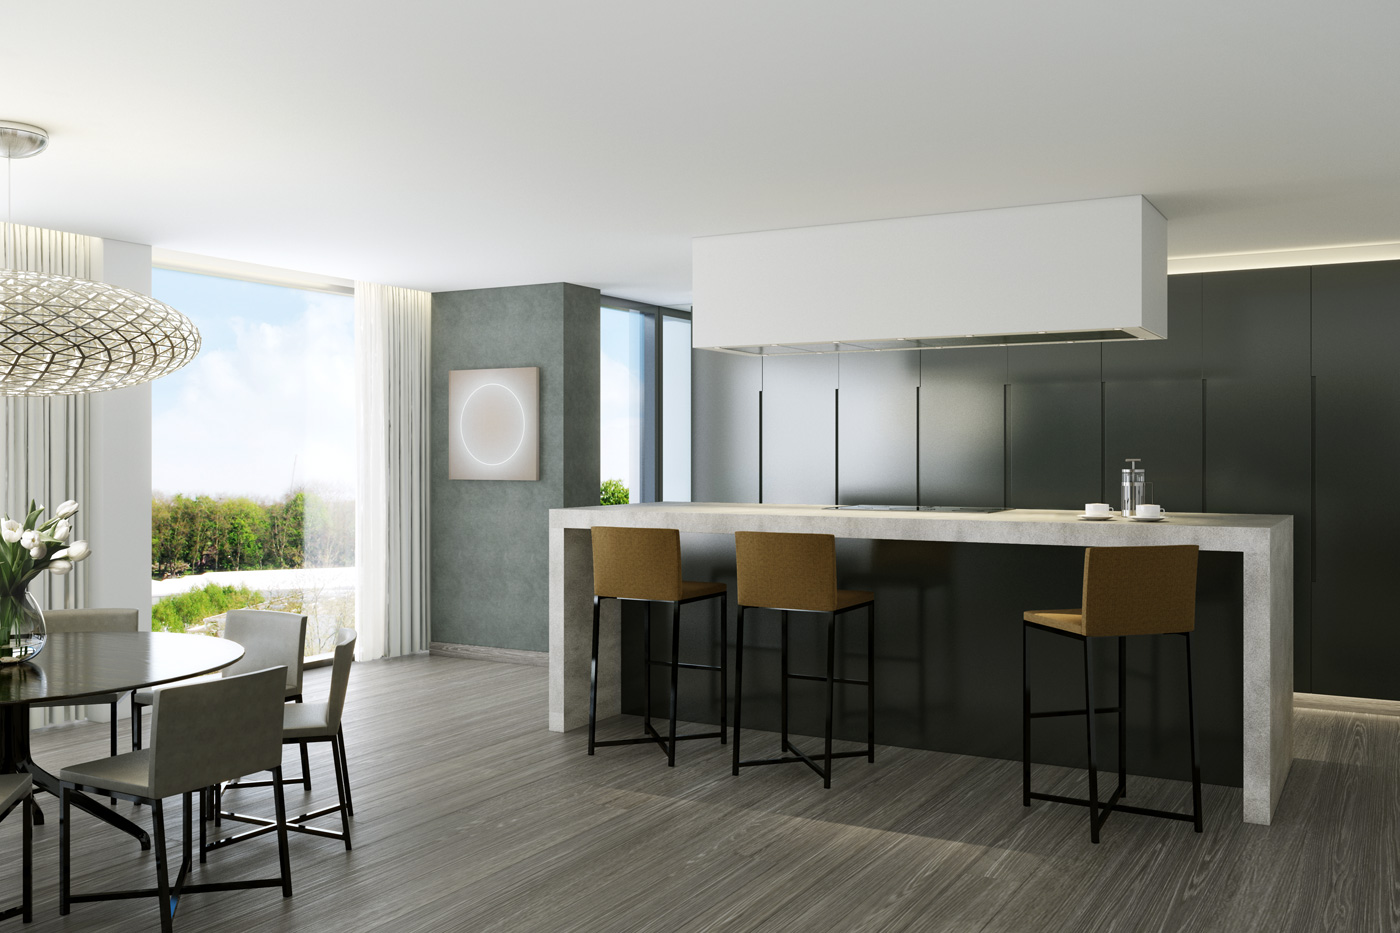 Marcus Cooper Group - Lords - Kitchen